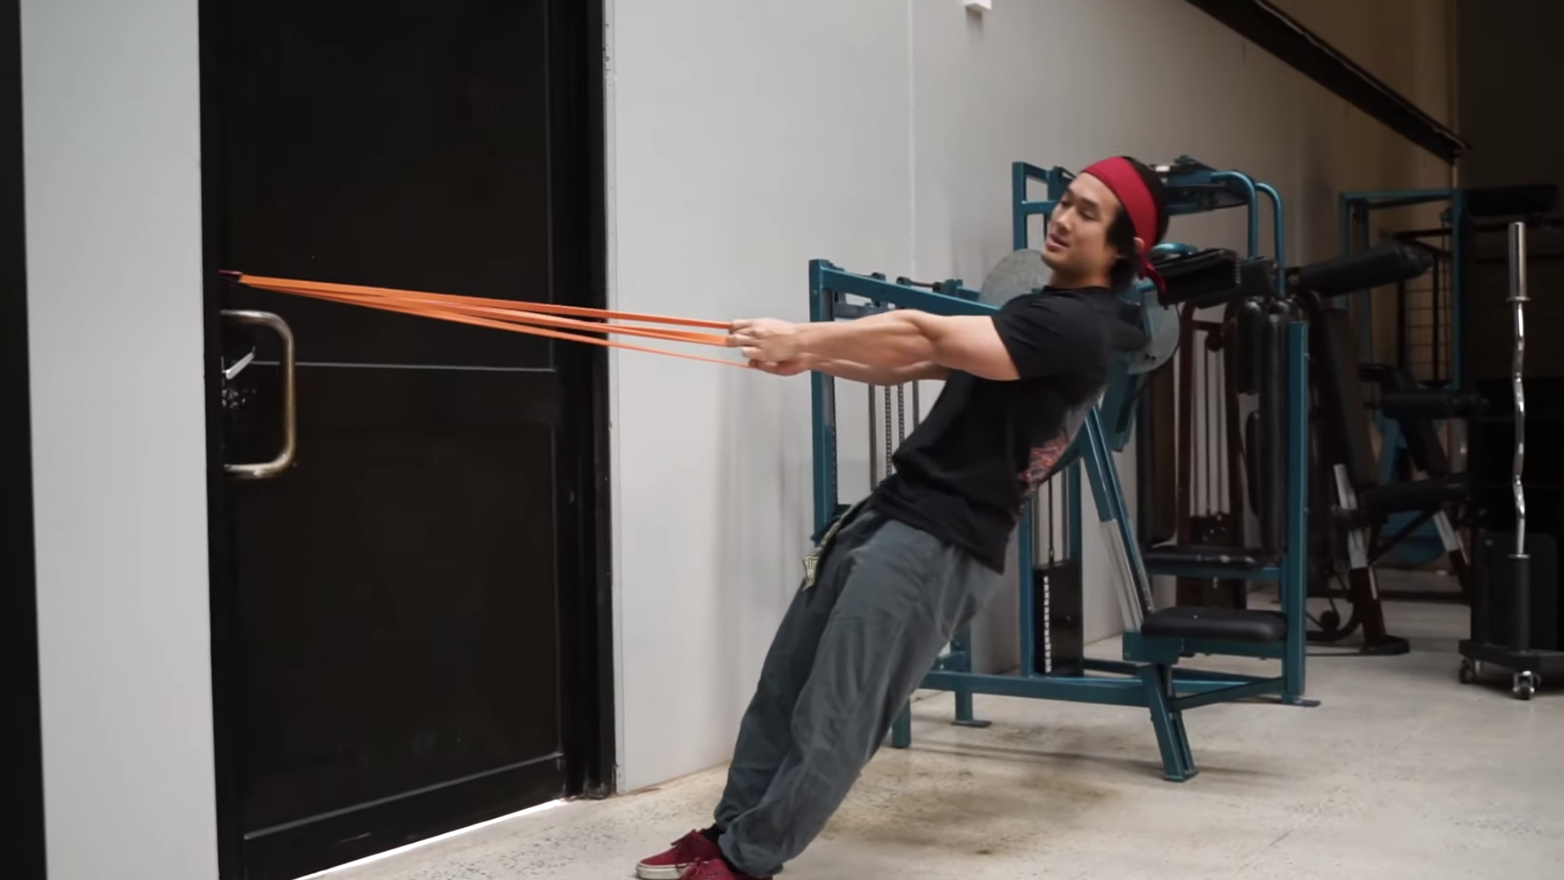 How to Use a Doorframe as a Resistance Band Anchor for Working Out